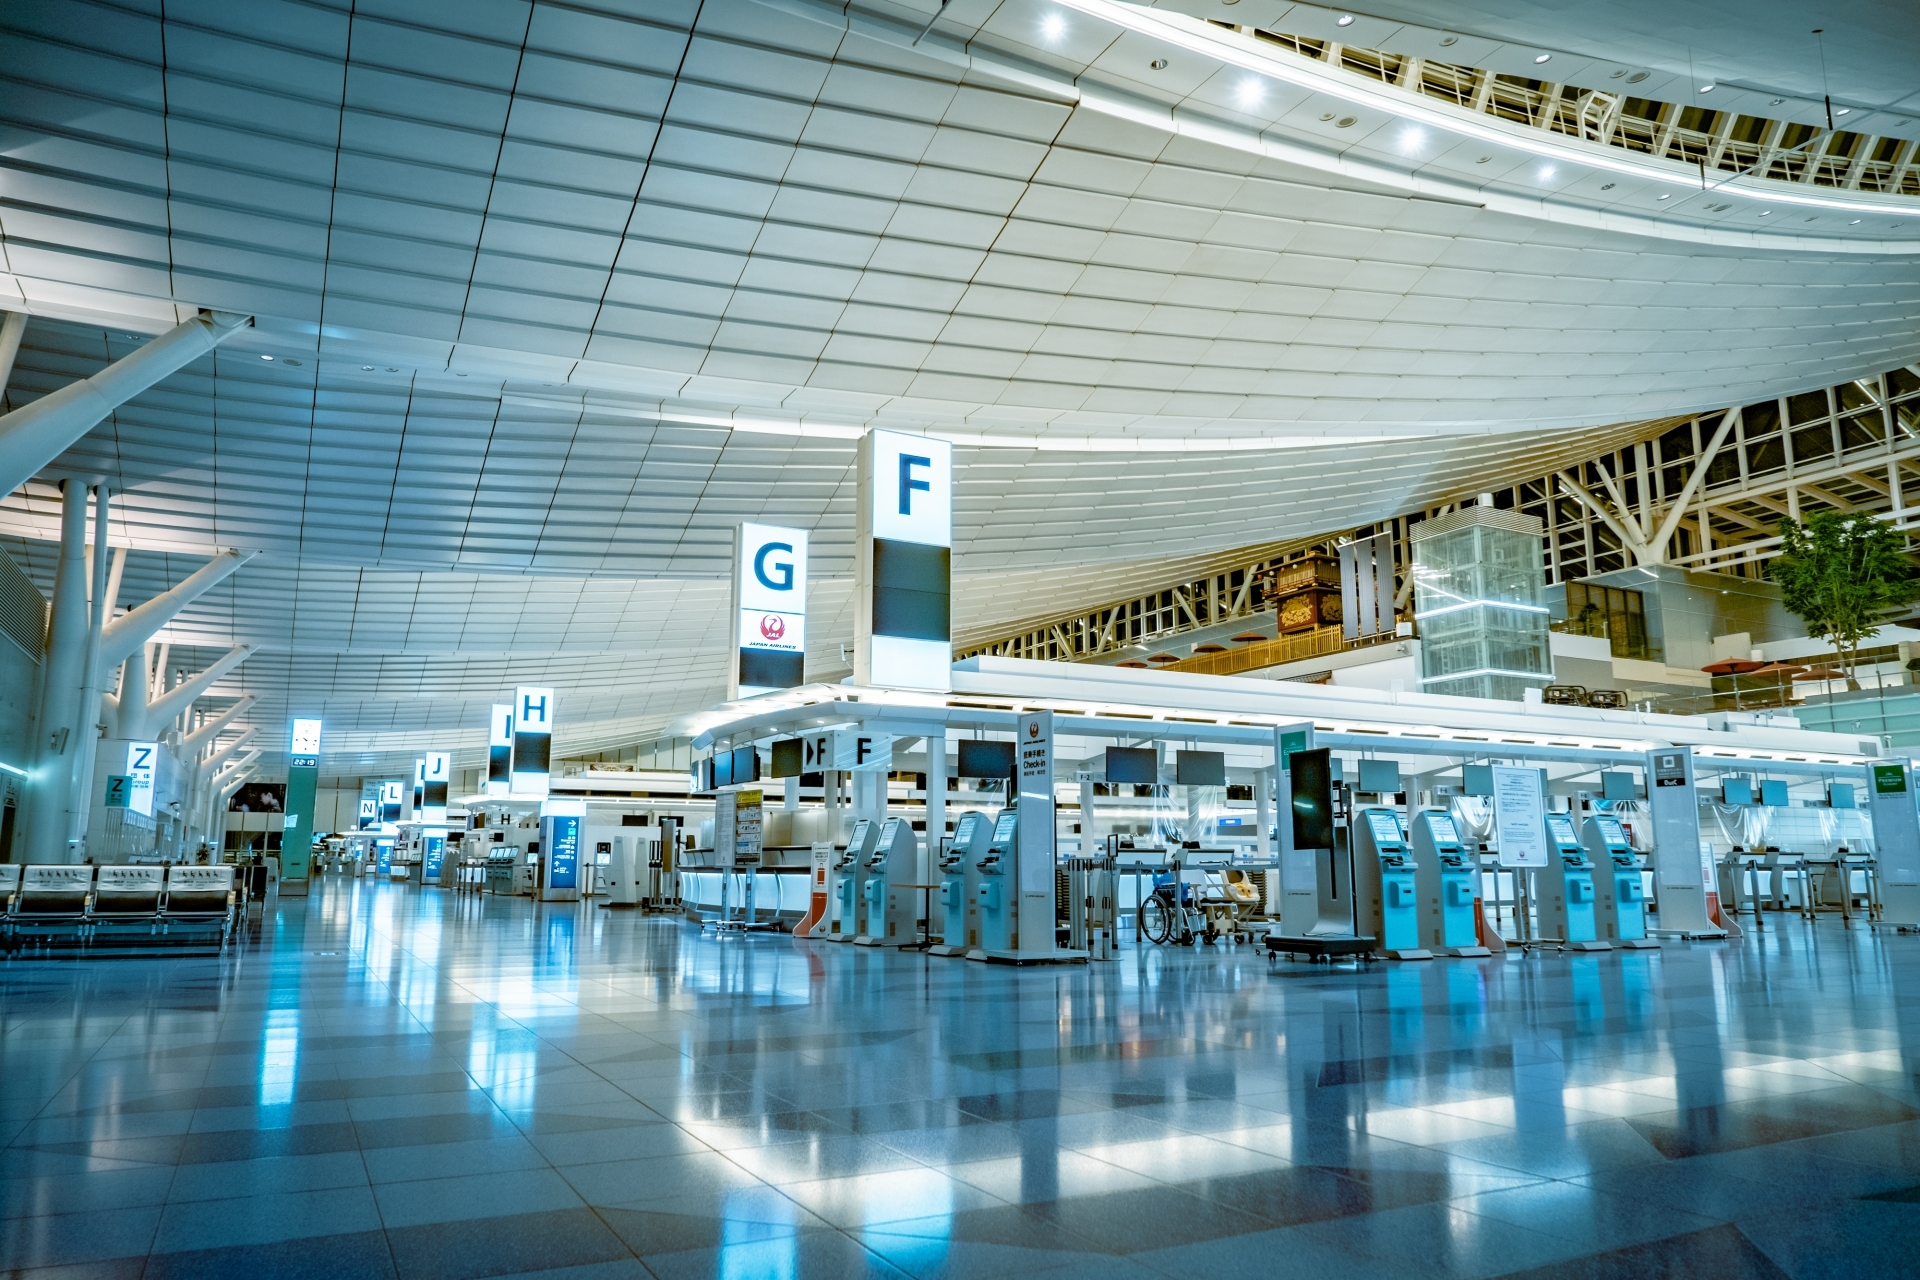 For the ninth consecutive year, Japan’s Haneda Airport has been named the cleanest airport in the world.